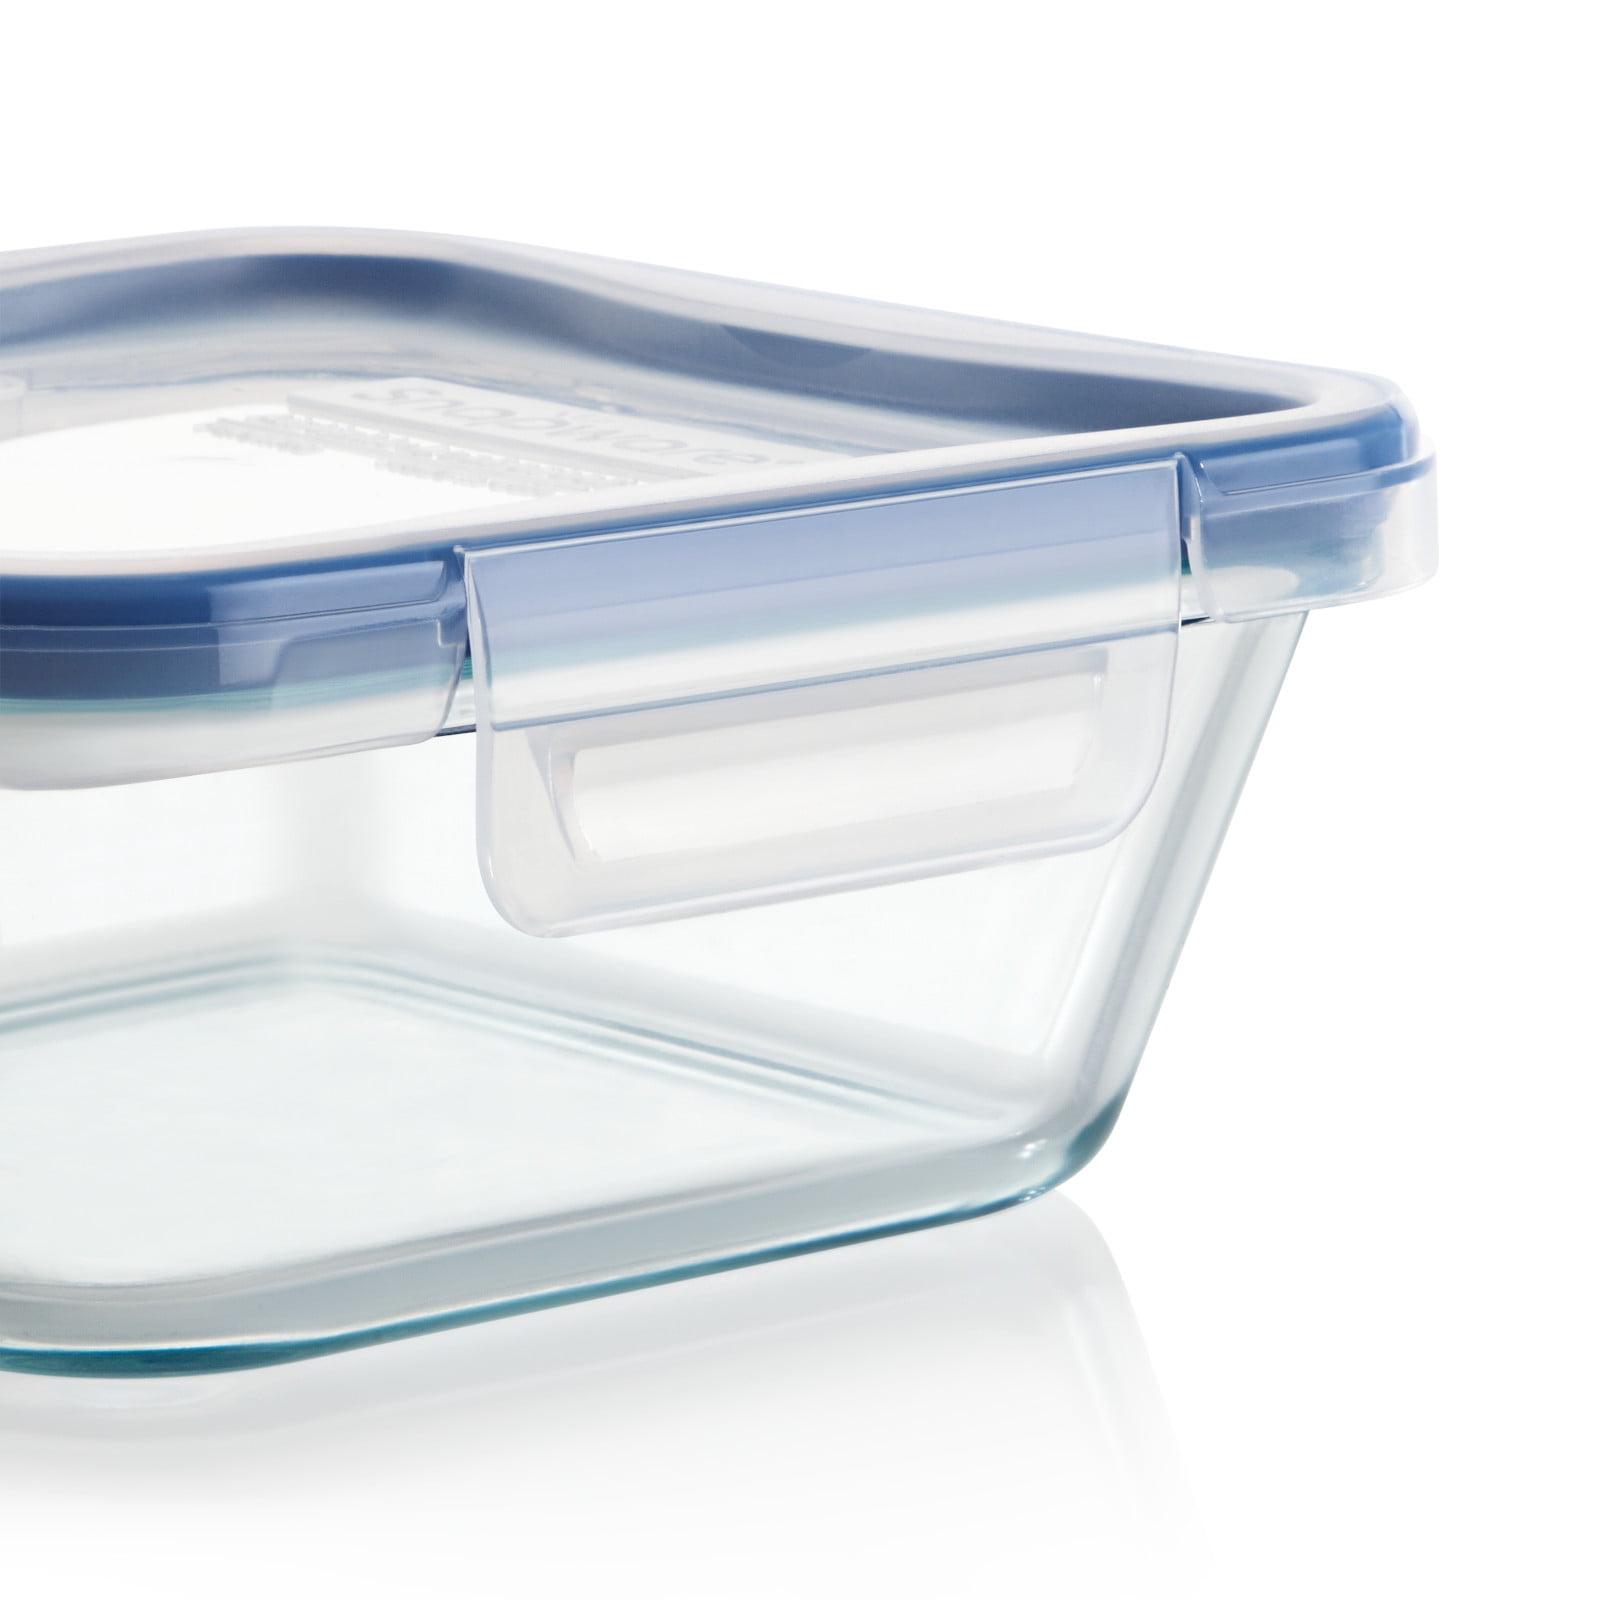 Snapware® Total Solution Glass Square Storage Container with Lid, 950 mL -  Kroger